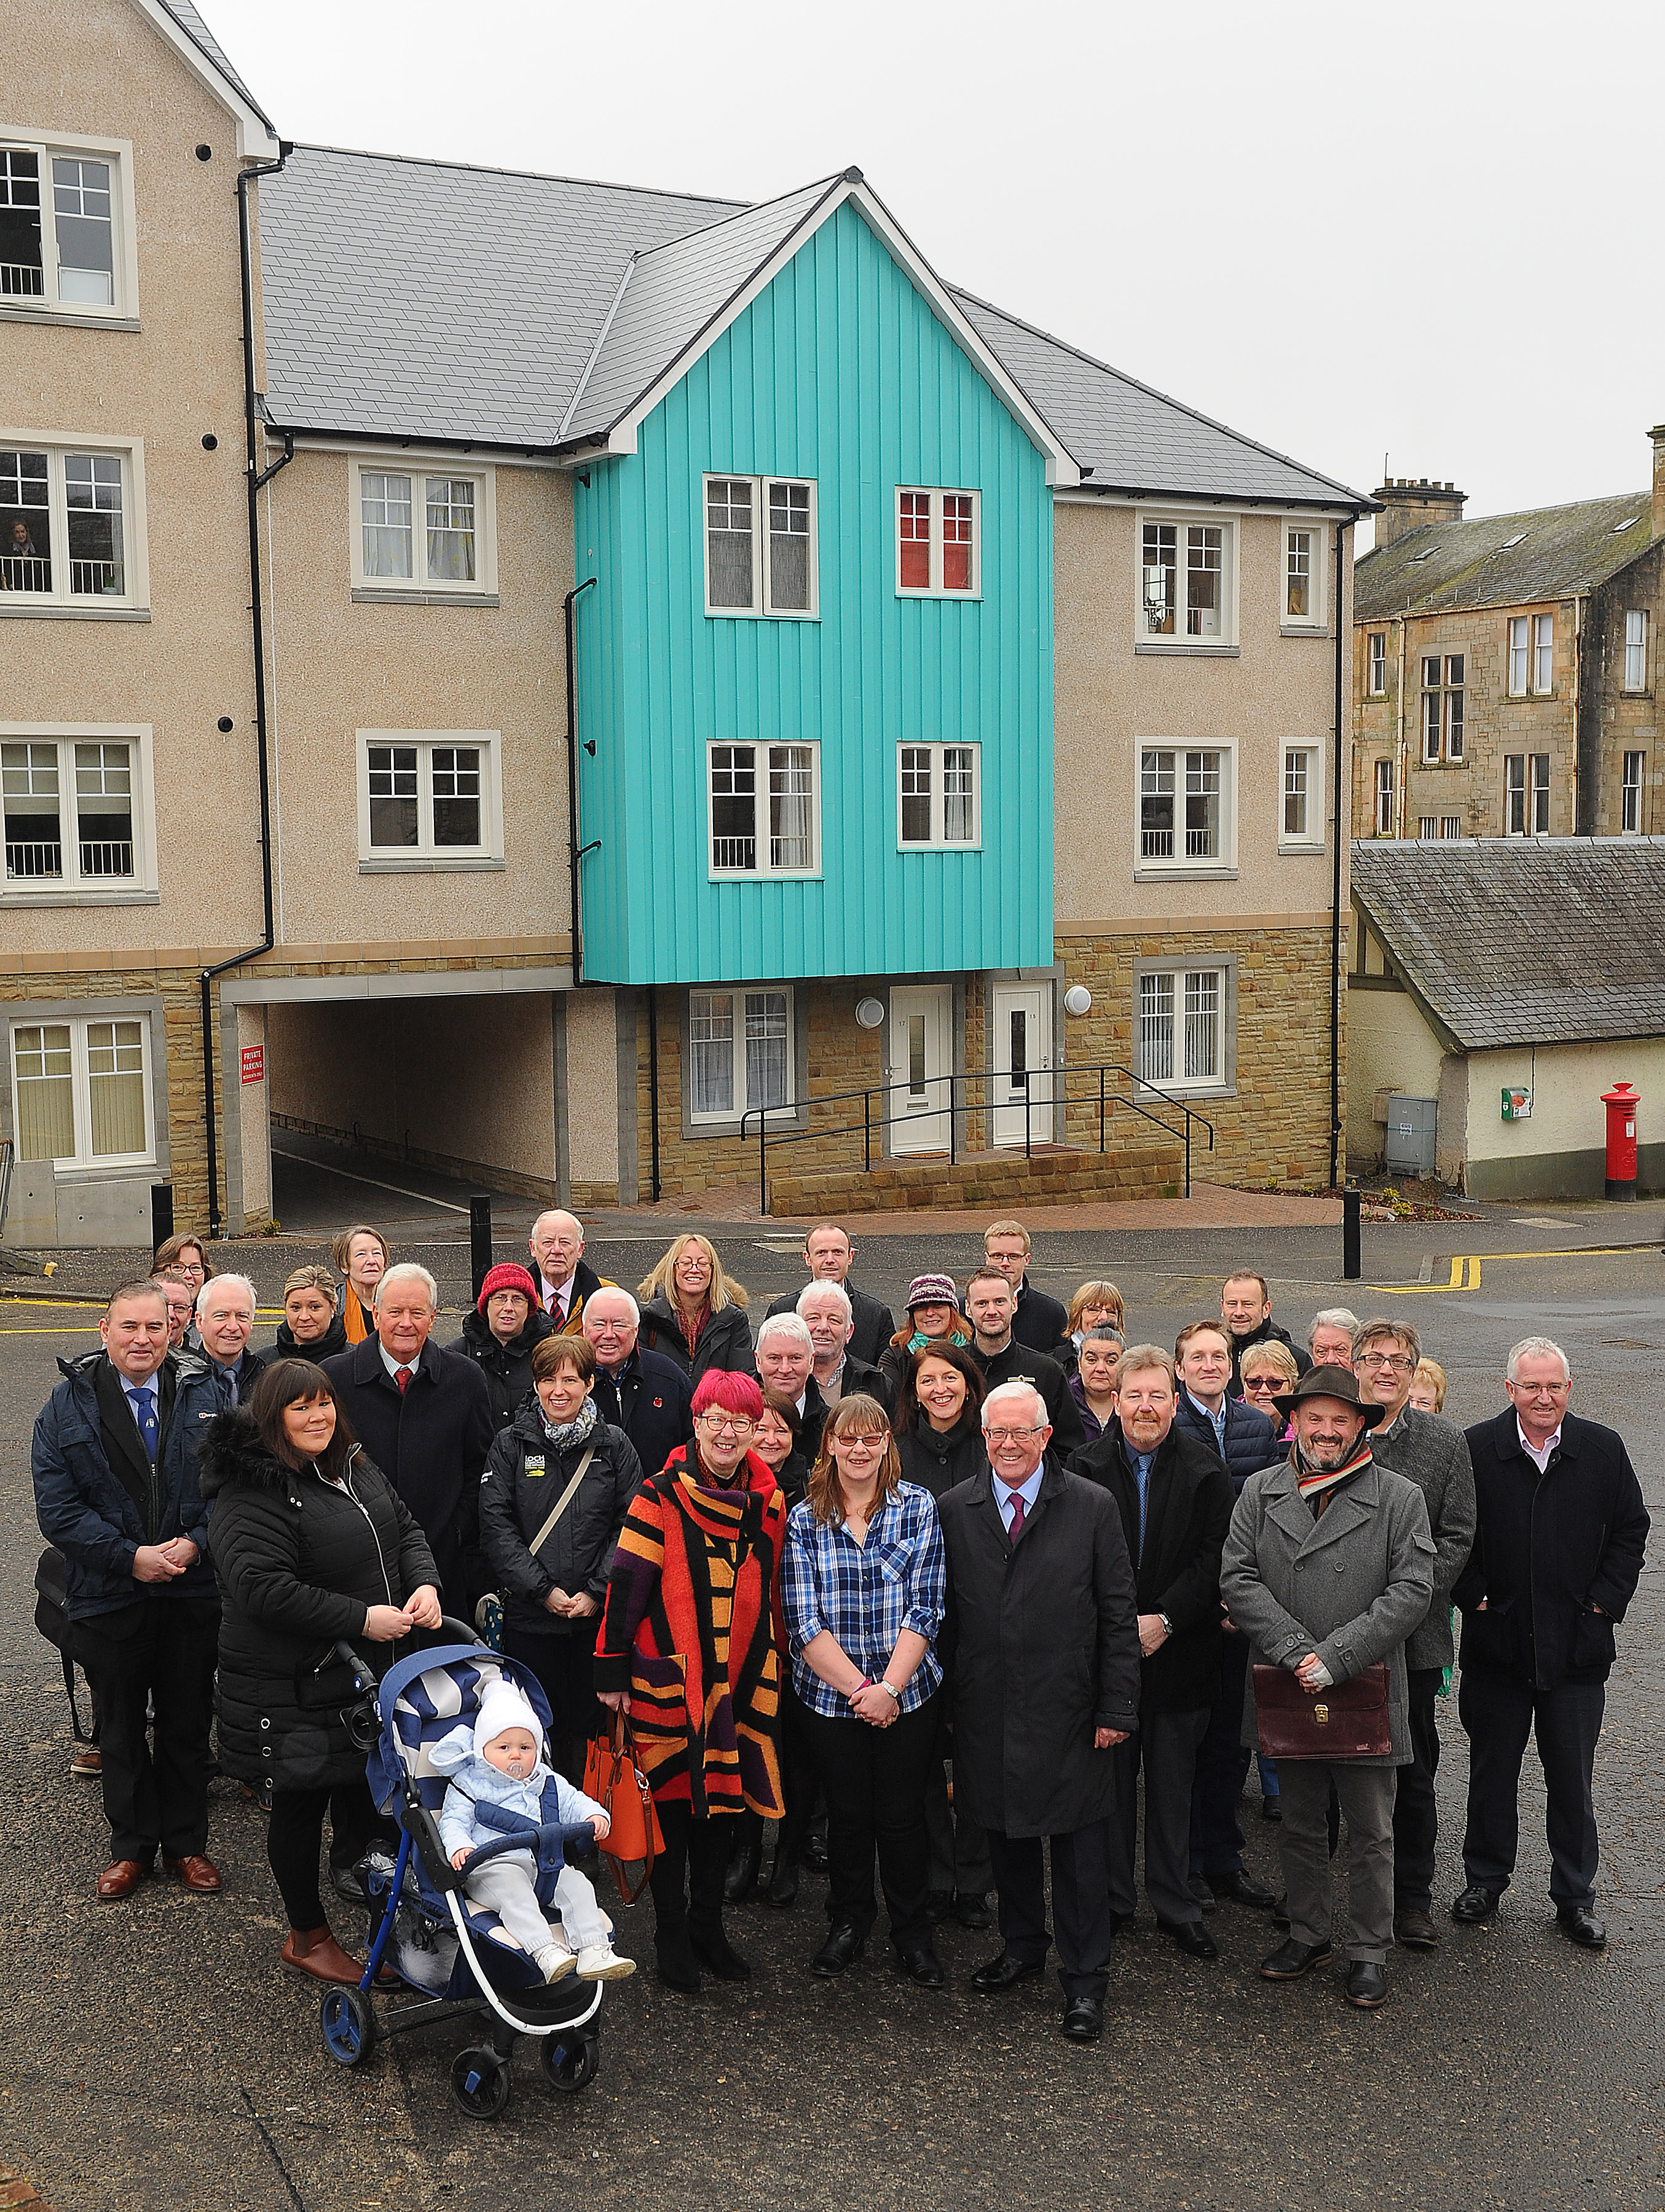 RSHA provides affordable housing boost for tenants in rural town